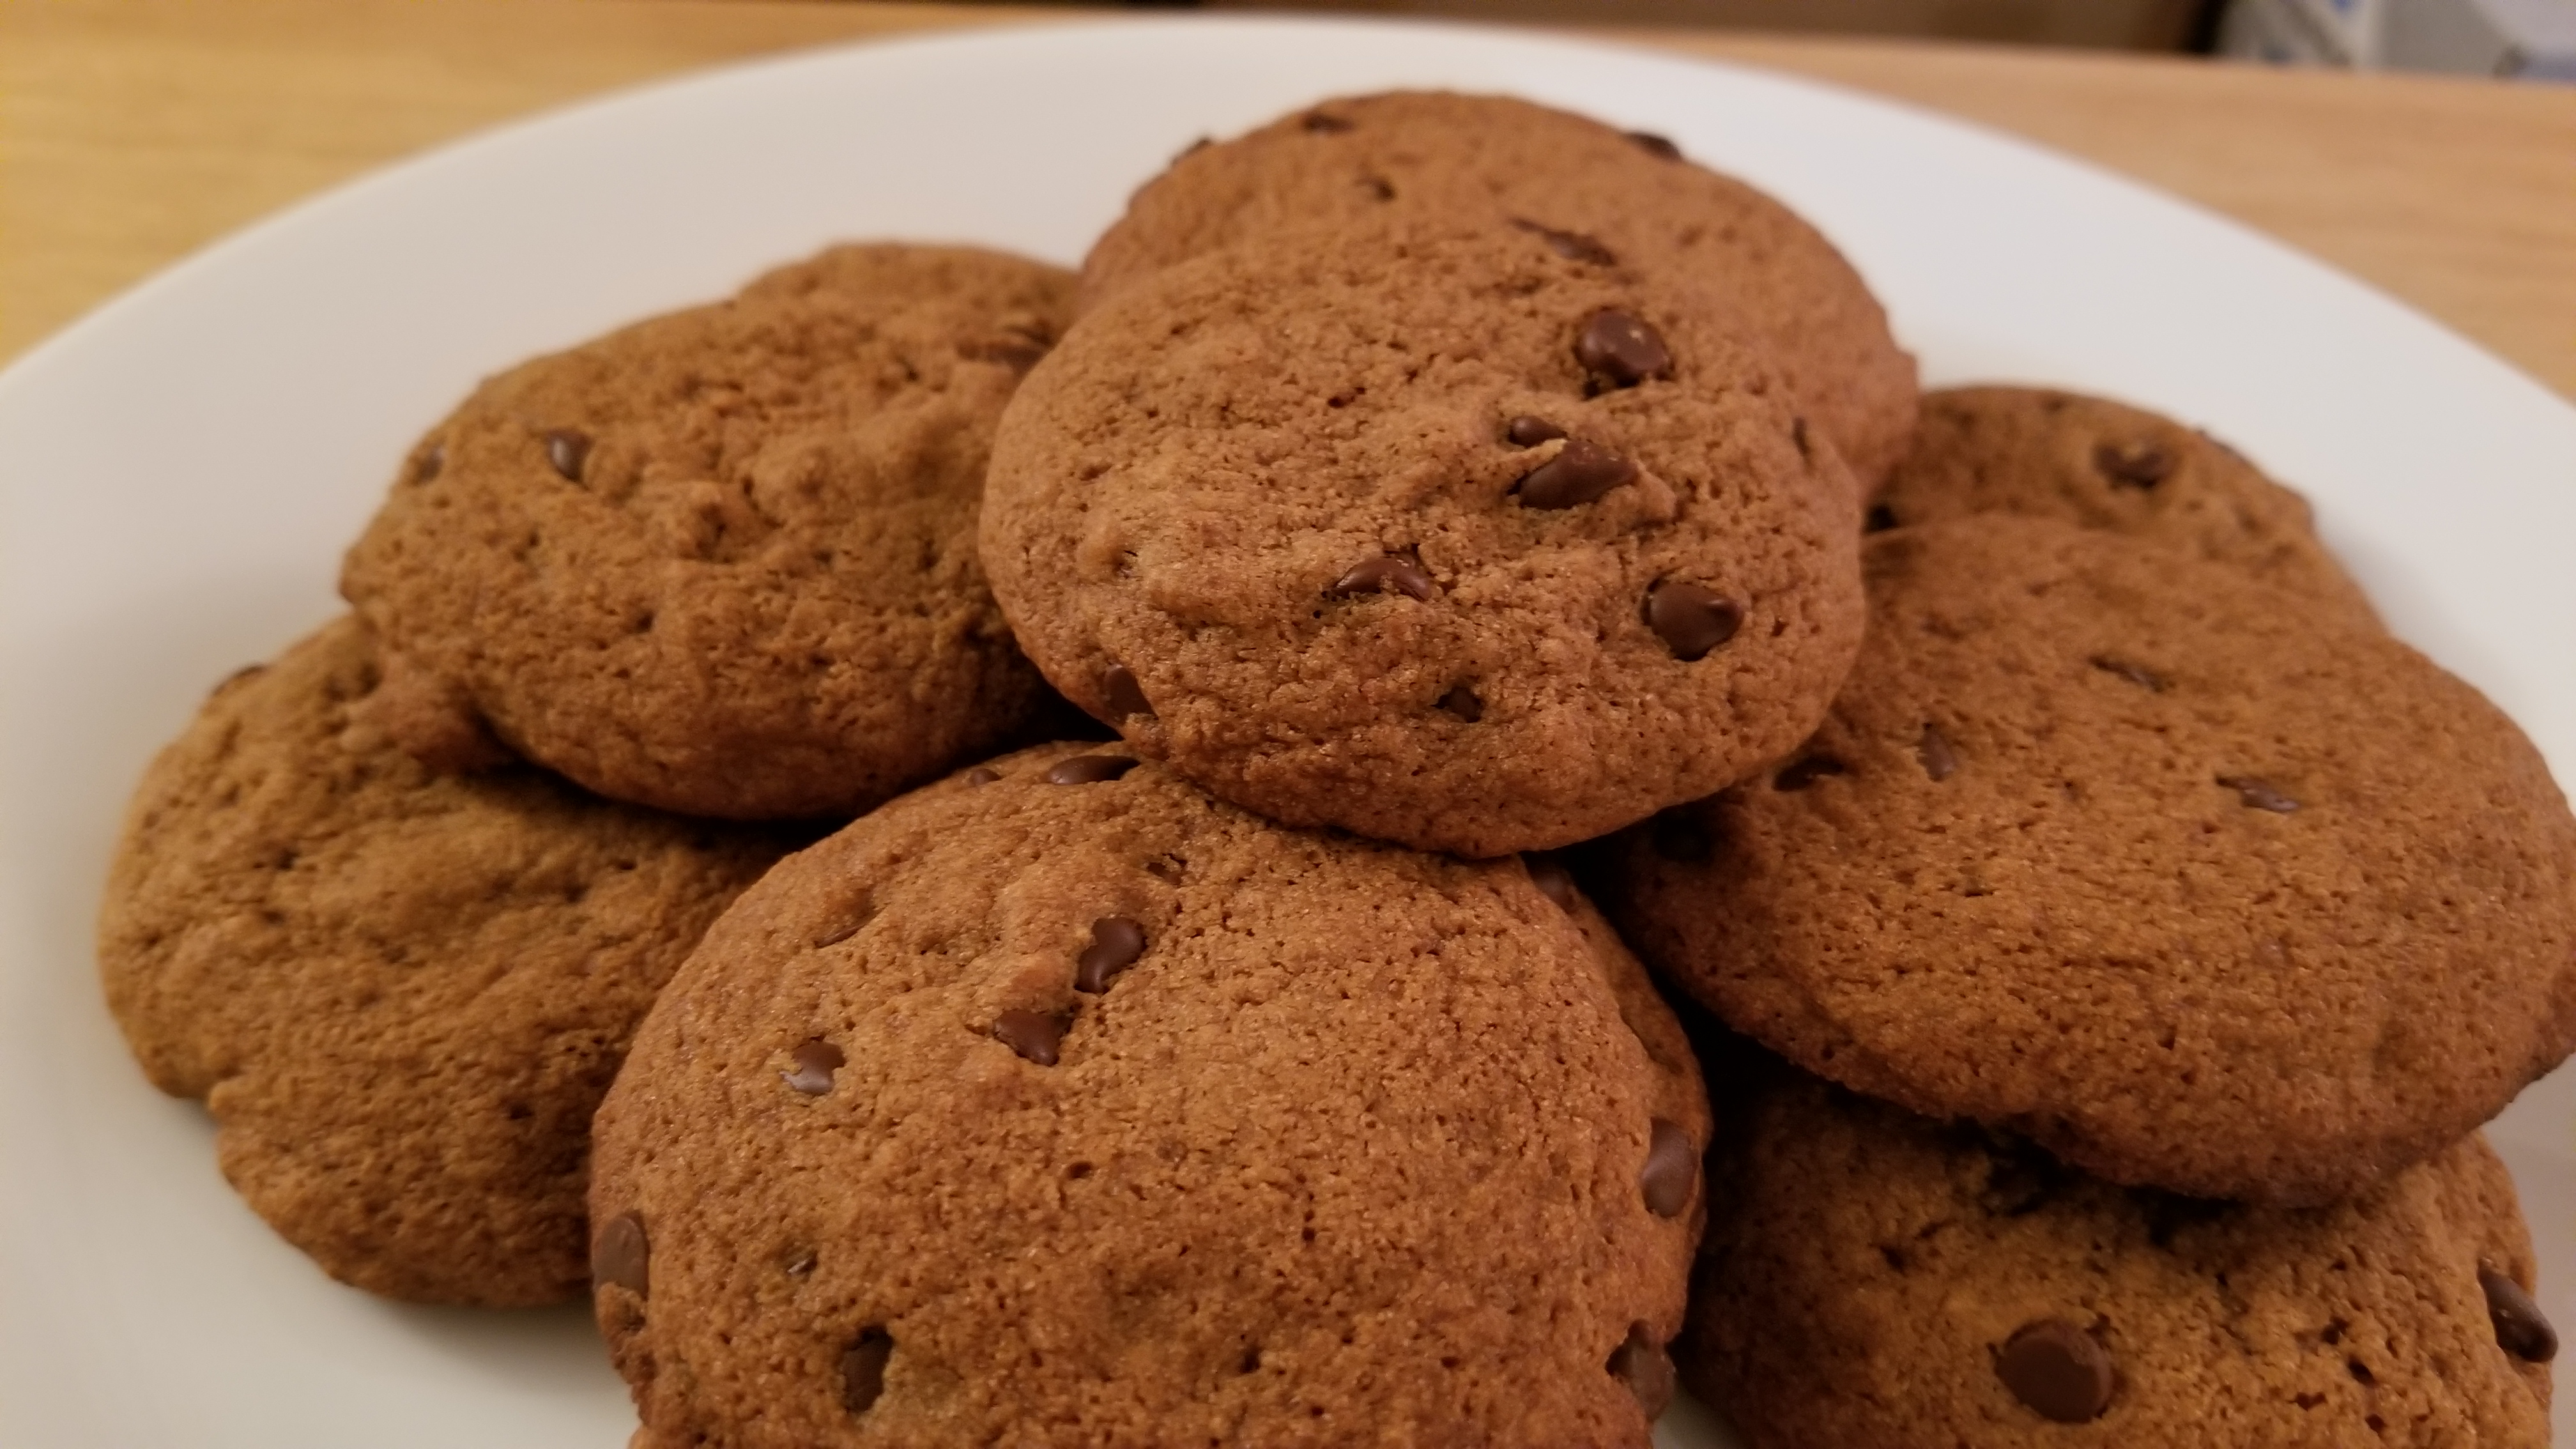 Perfect soft and chewy paleo chocolate chip cookies